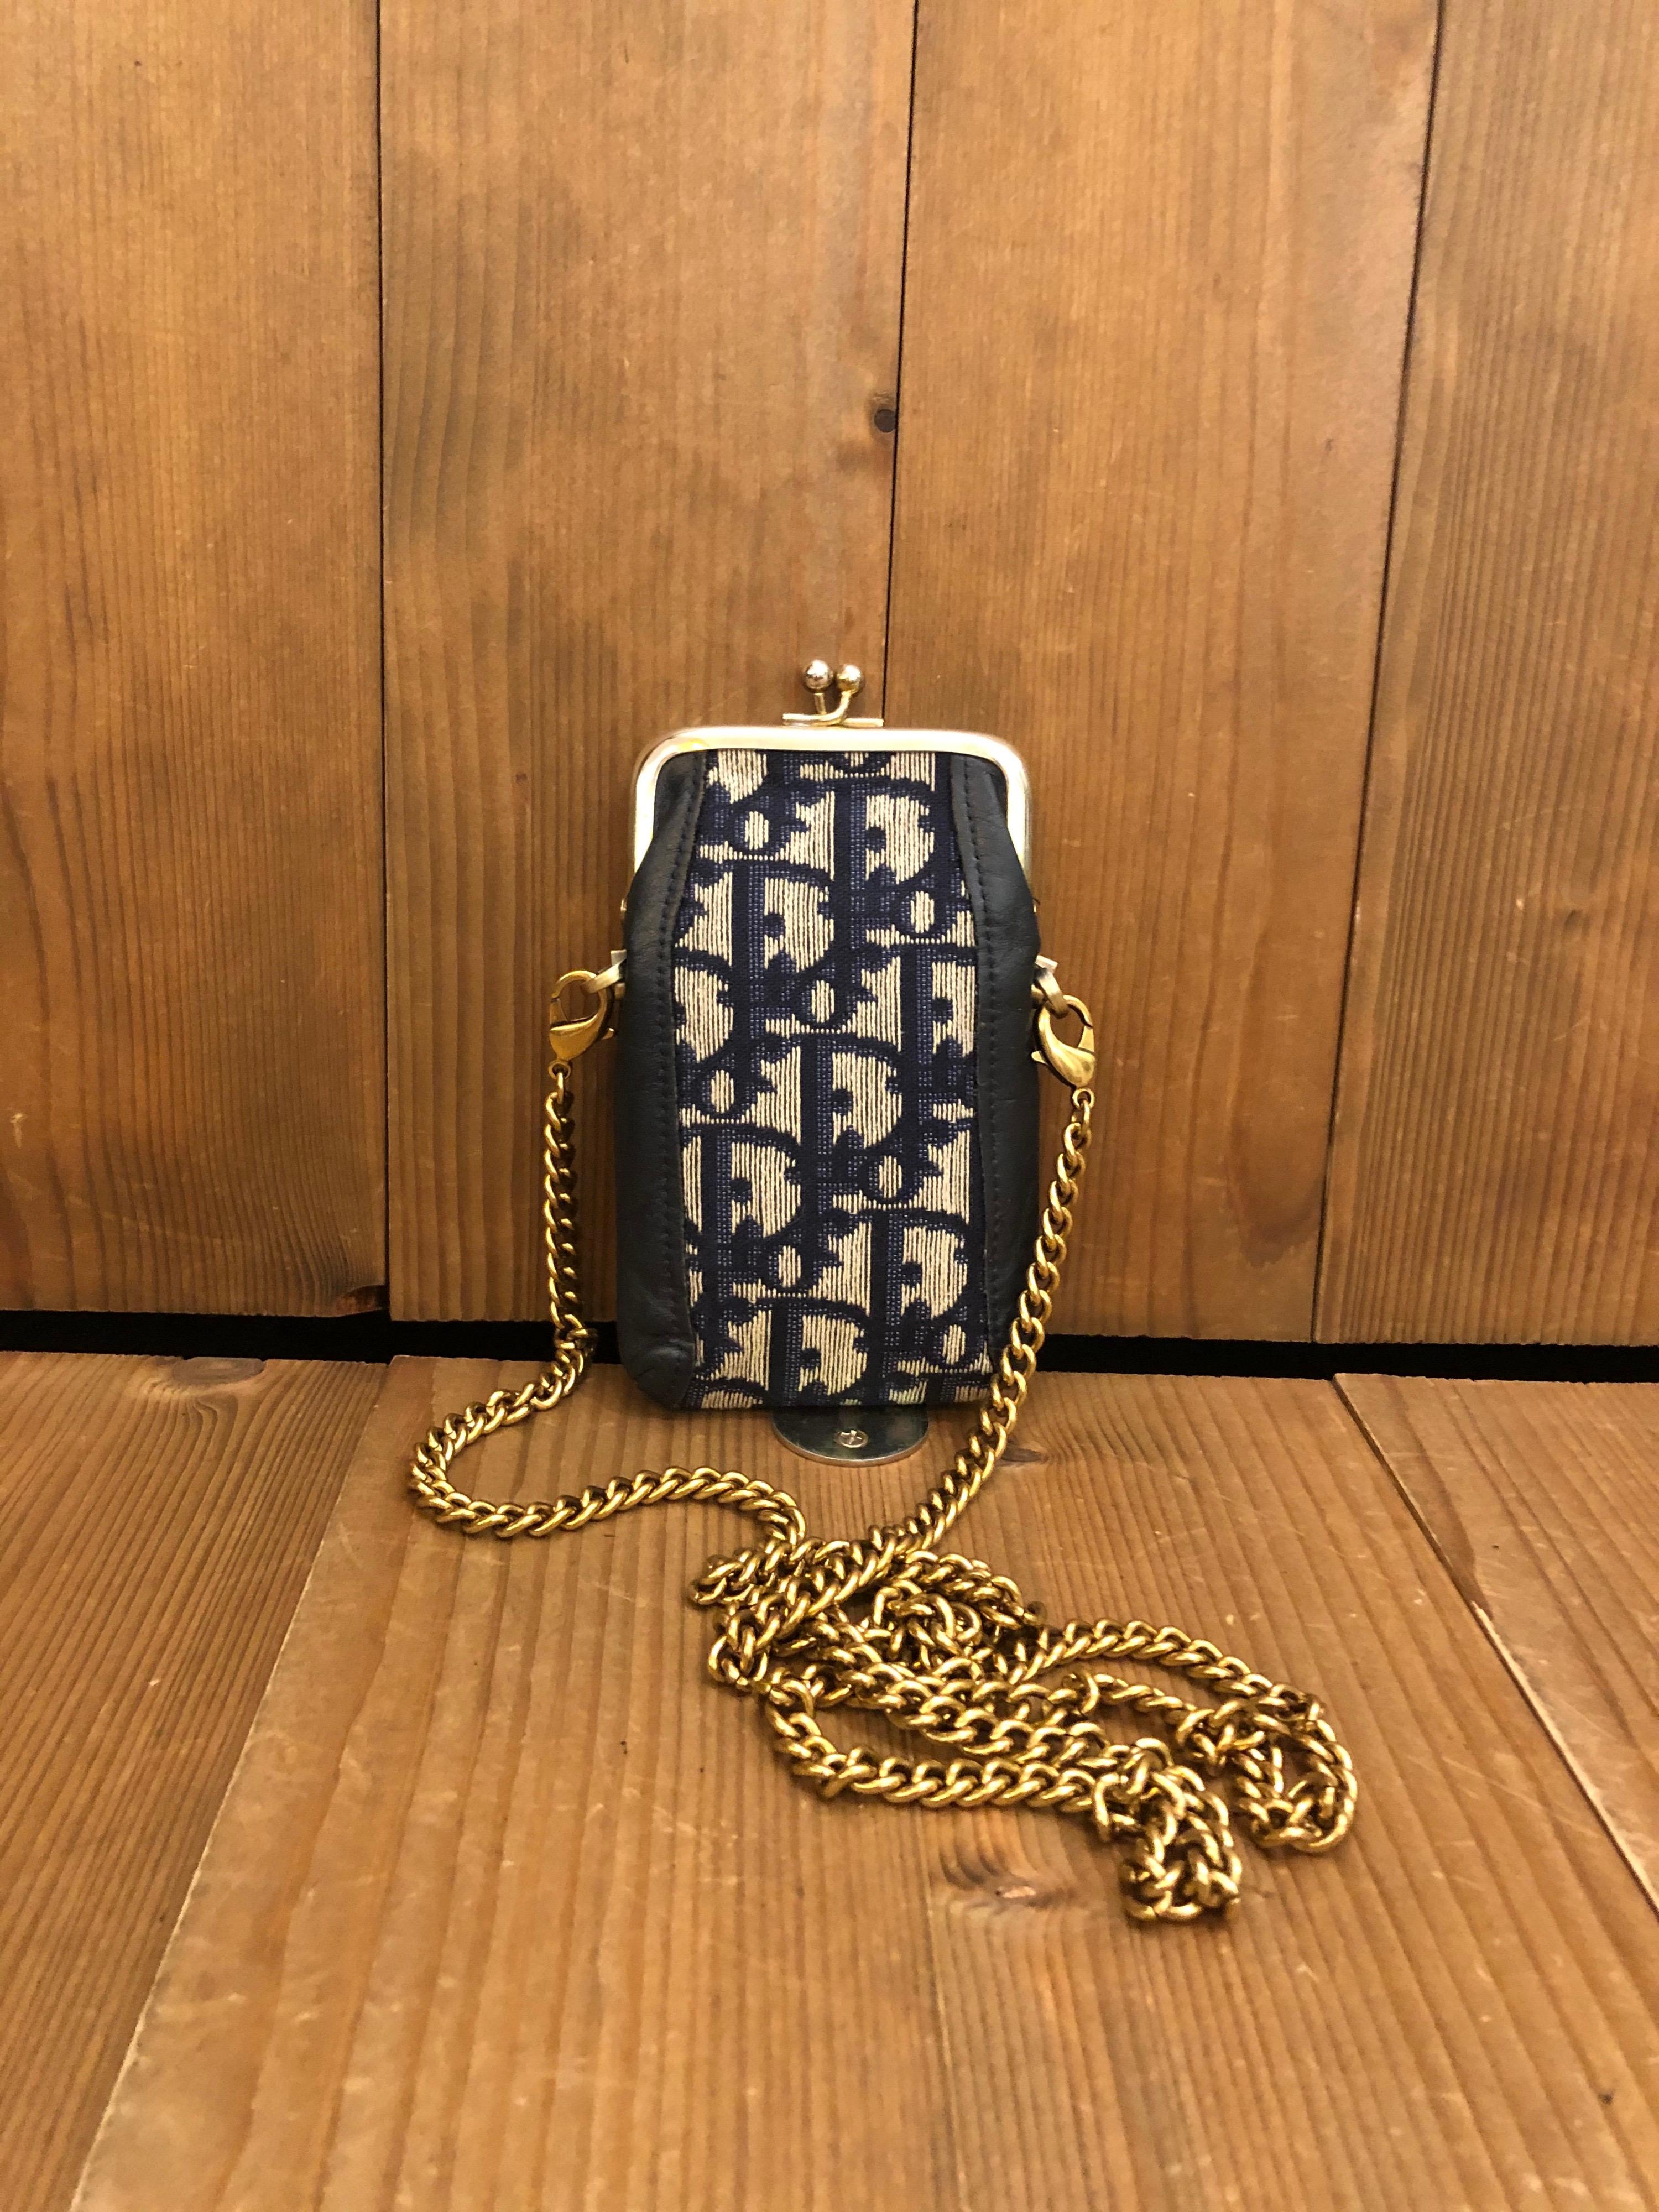 This vintage CHRISTIAN DIOR coin pouch is crafted of Dior signature Trotter Jacquard in navy and leather featuring a kiss clasp closure. It opens to a navy nylon interior. Third party hardware added on the sides to secure a gold toned chain.